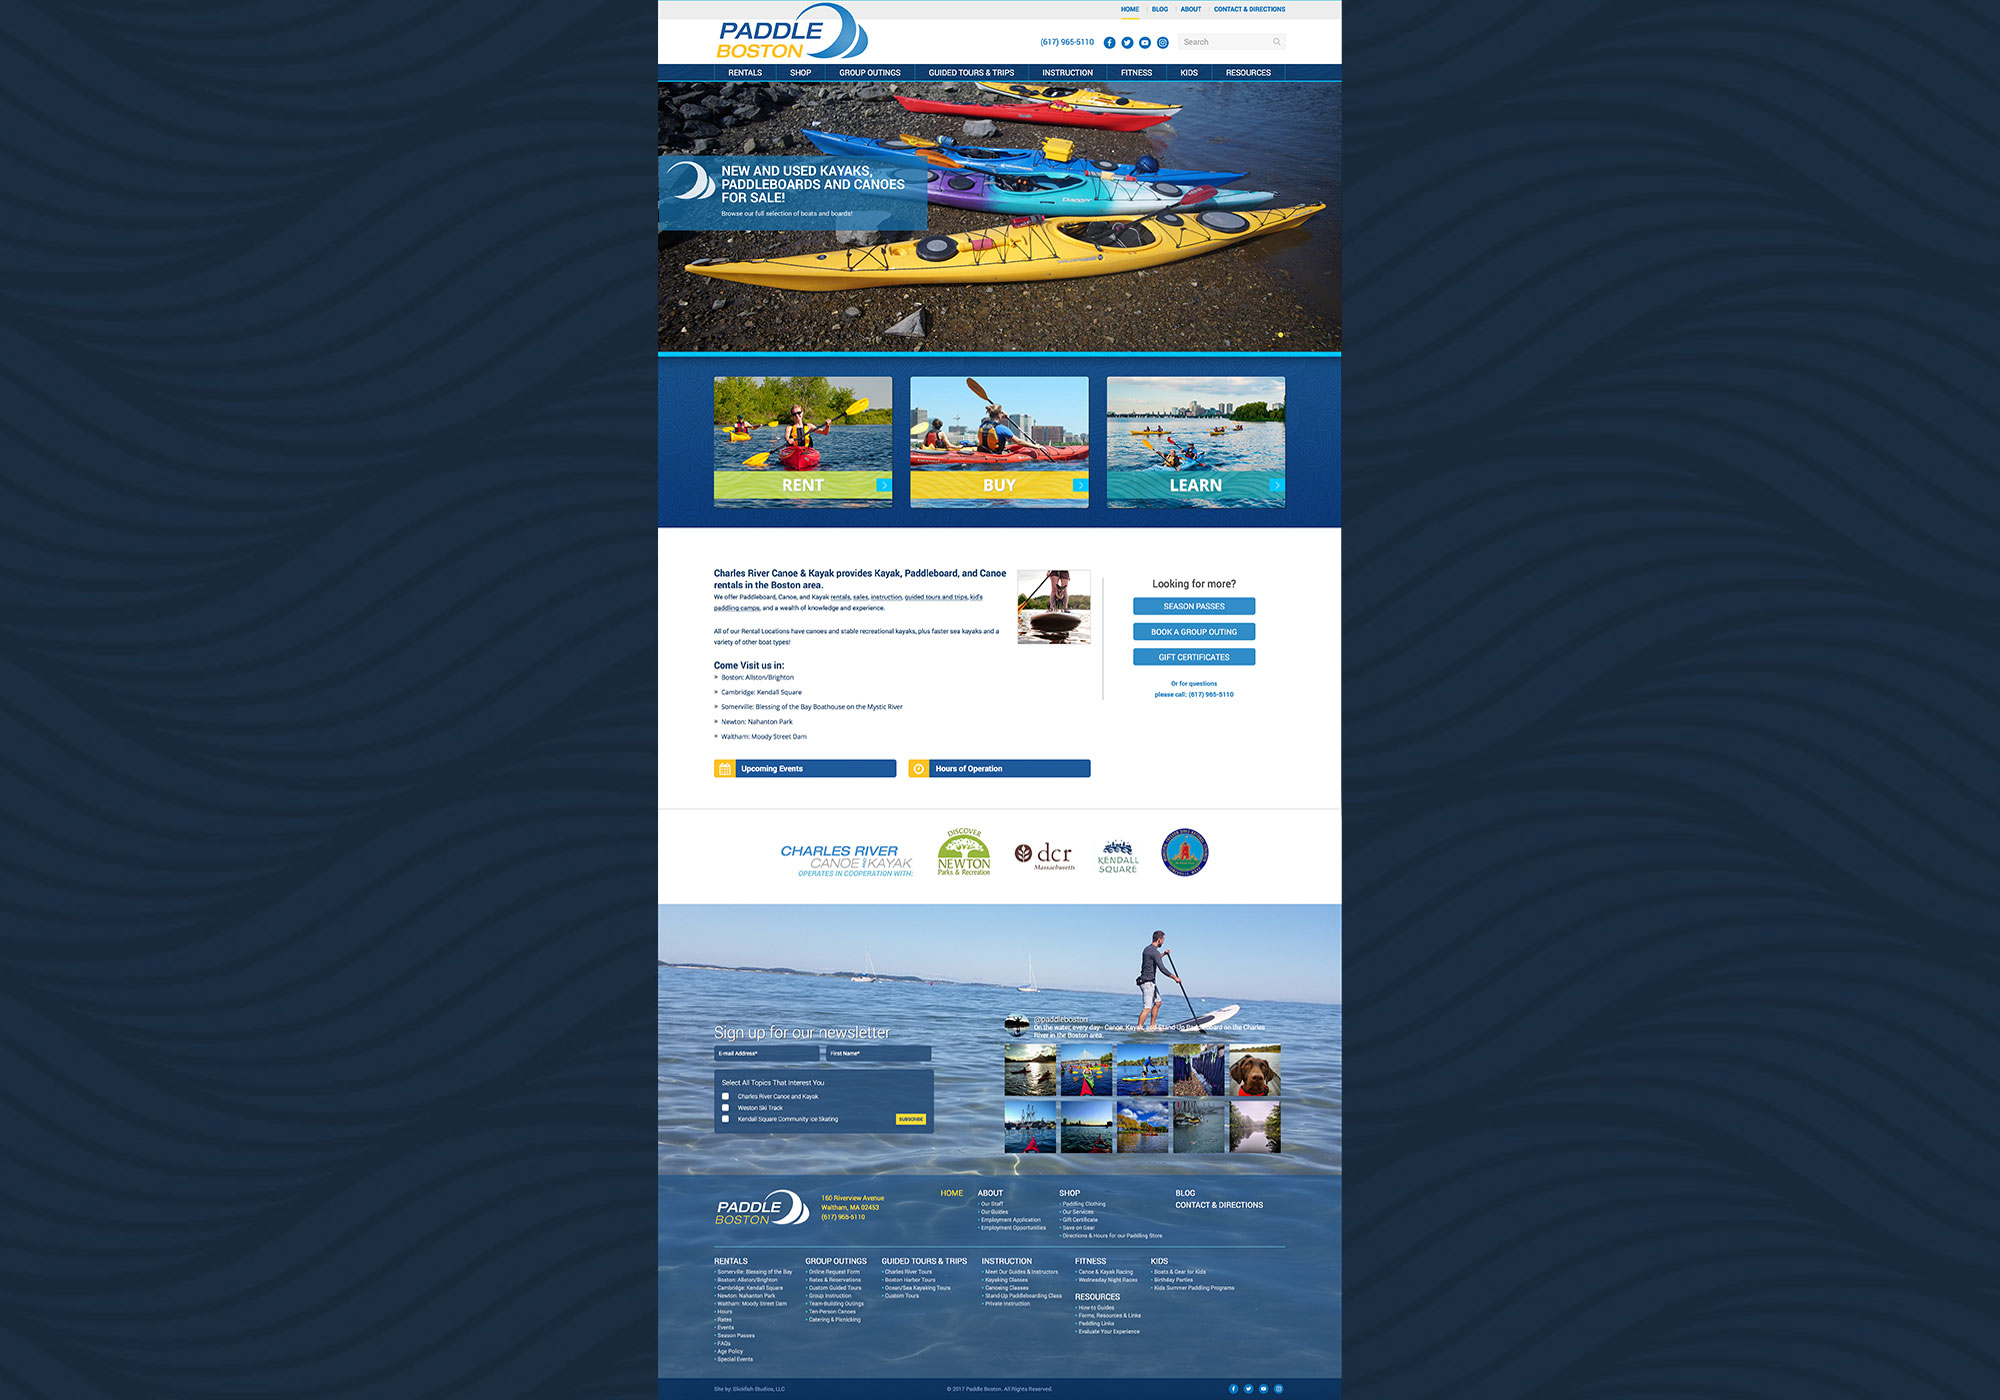 A composite of the homepage for Paddle Boston designed by SlickFish Studios in Portland, Maine.